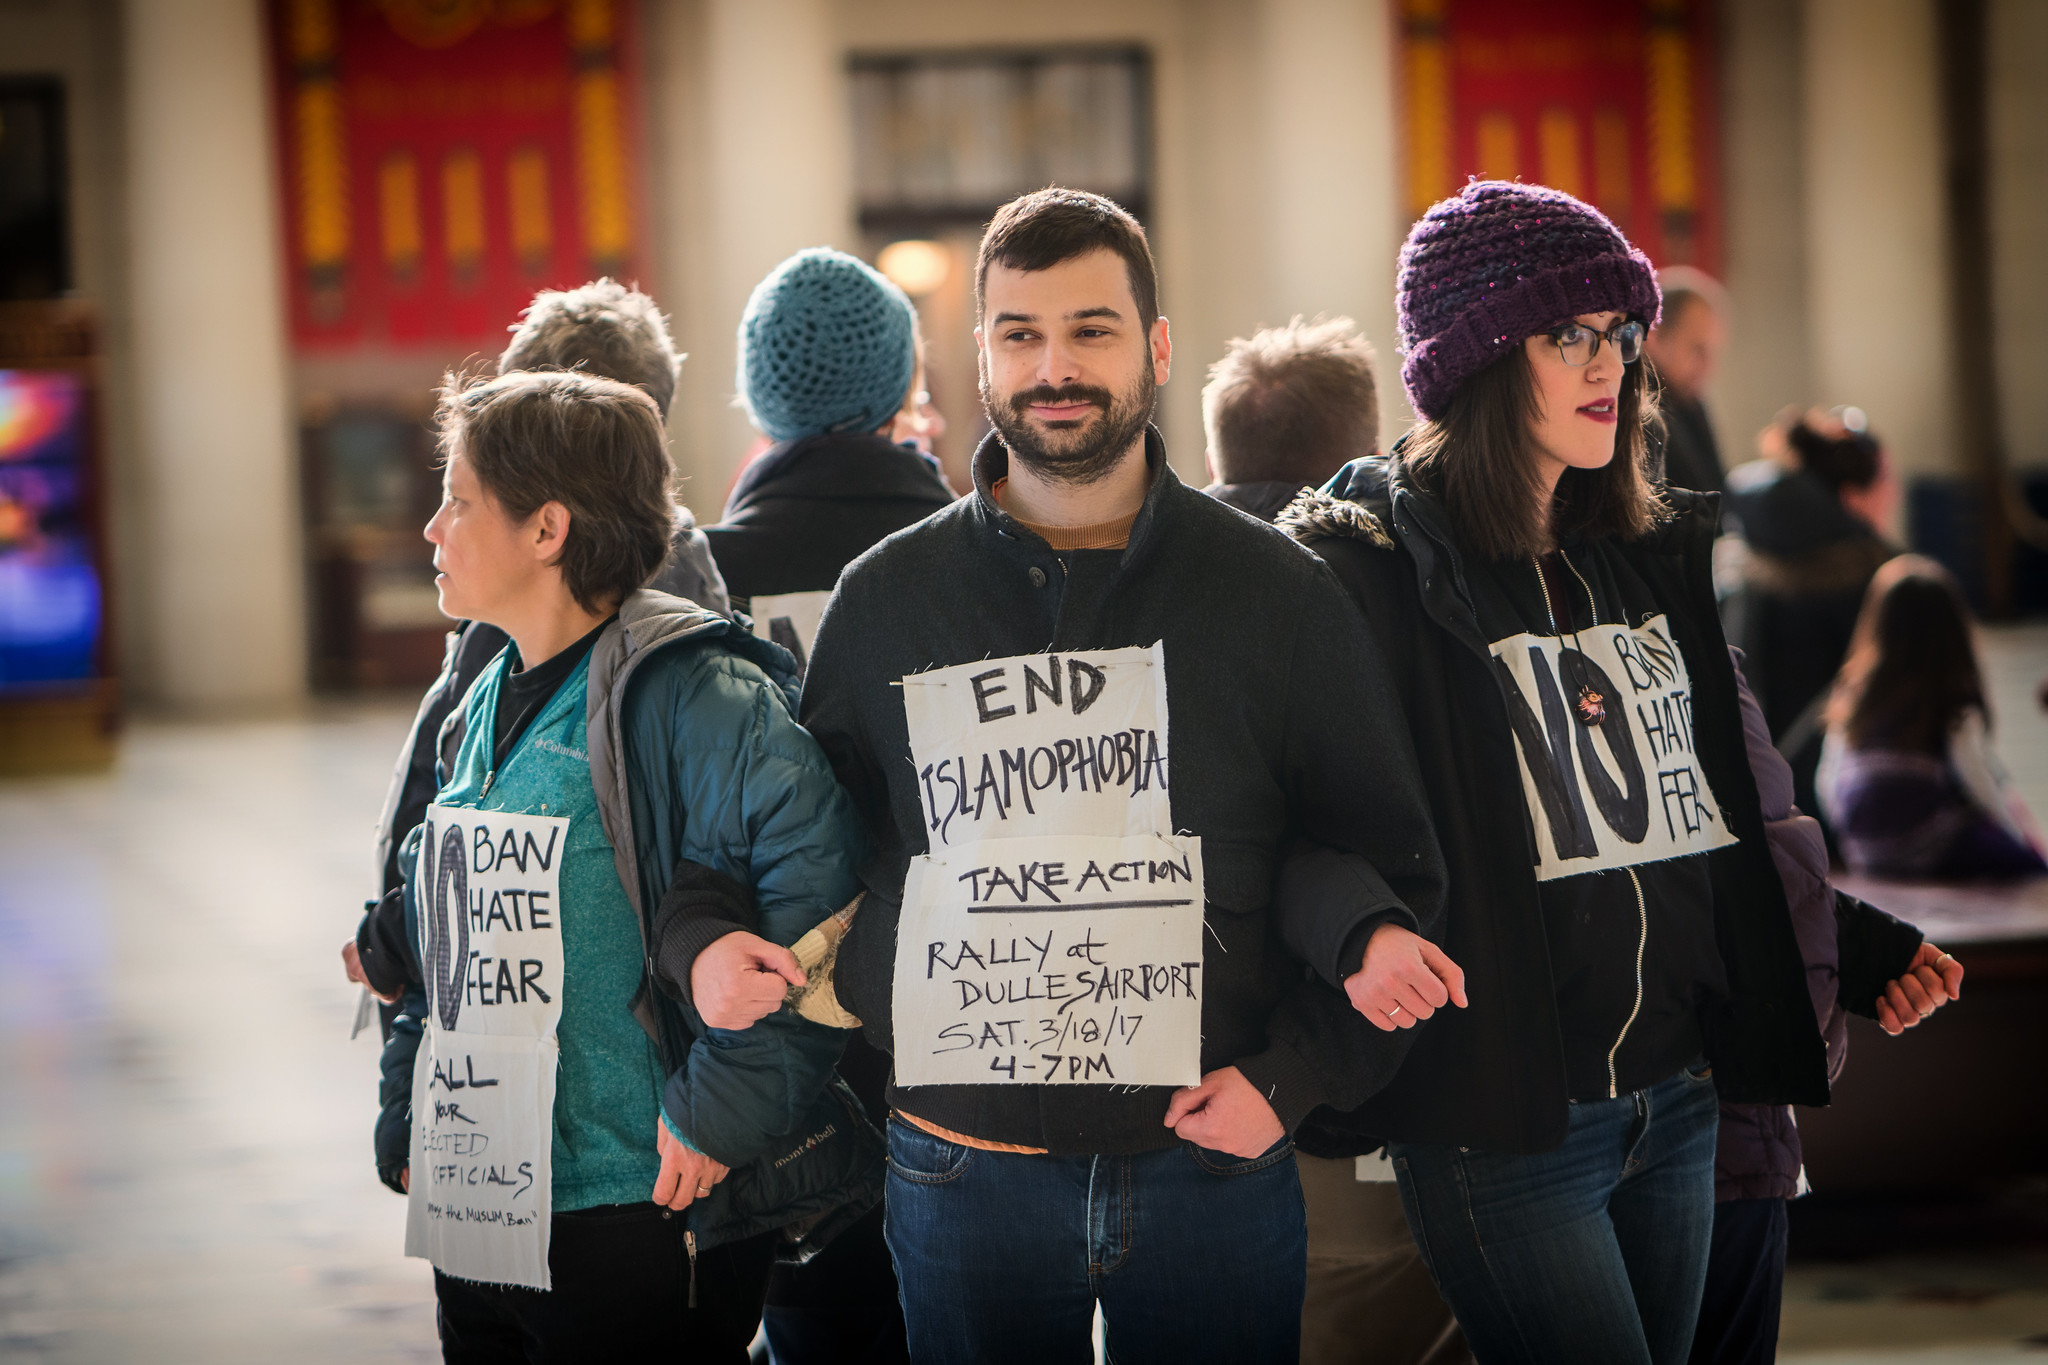 Protesters link arms, wearing signs saying "End Islamophobia" at Union Station in Washington DC, photo by Lorie Shaull from Flickr.